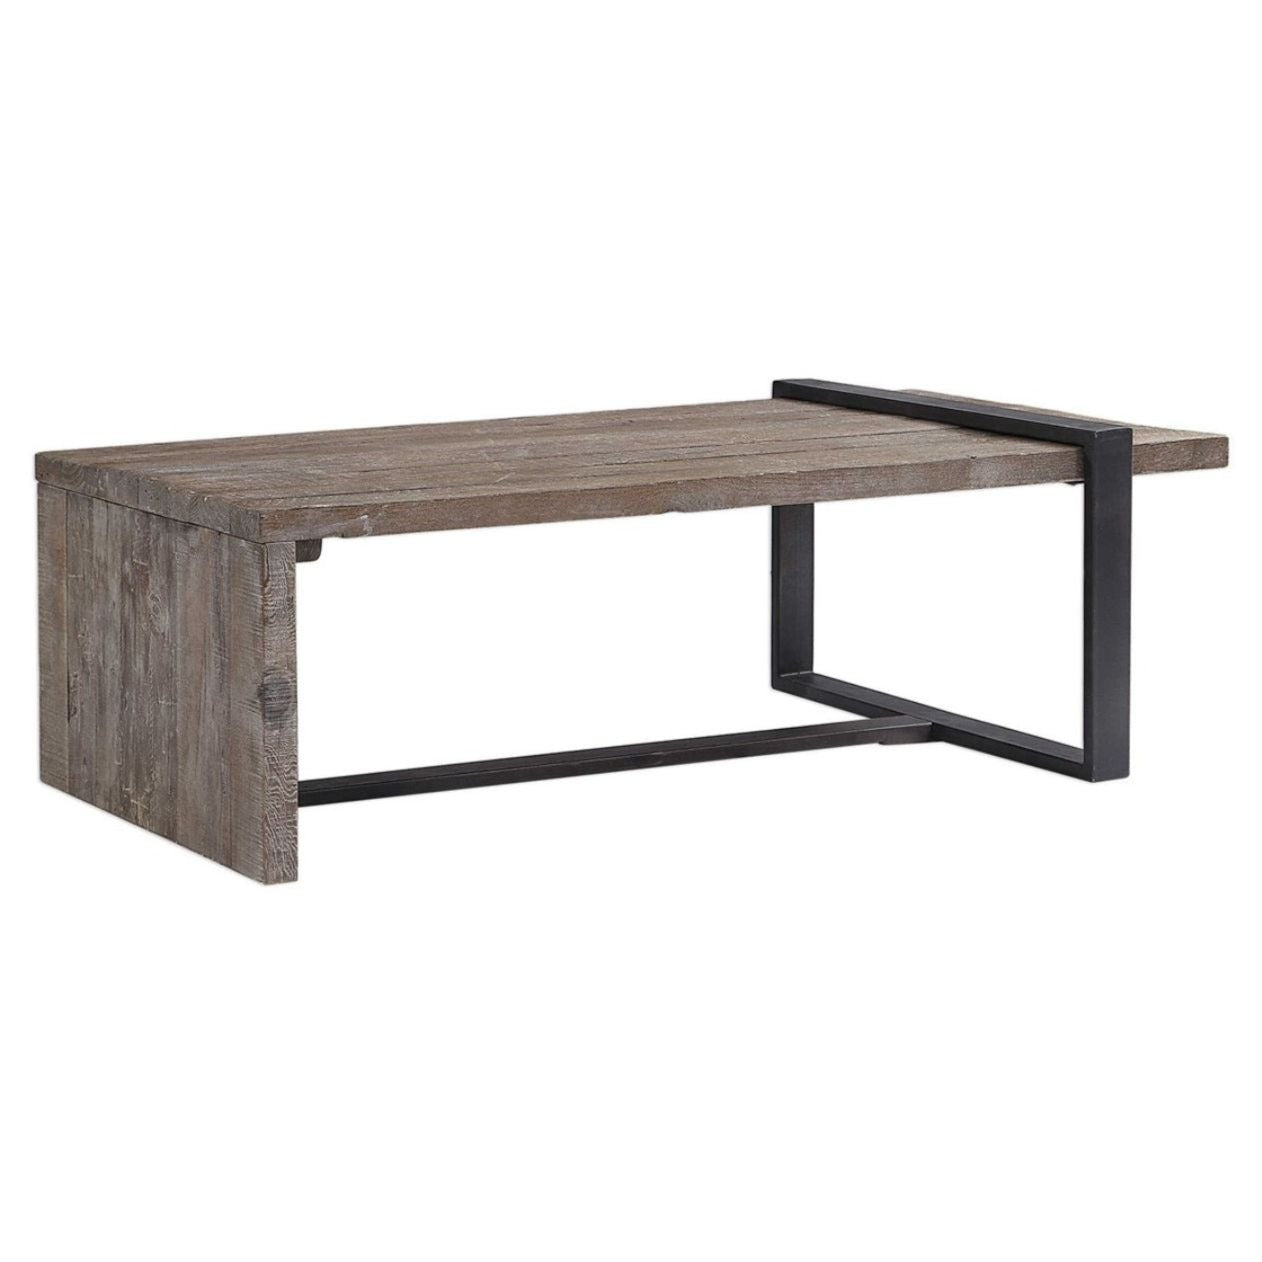 this coffee table features weathered pine finished in a stony gray wash, accented with an iron strap support in a heavily aged dark bronze. Side view.